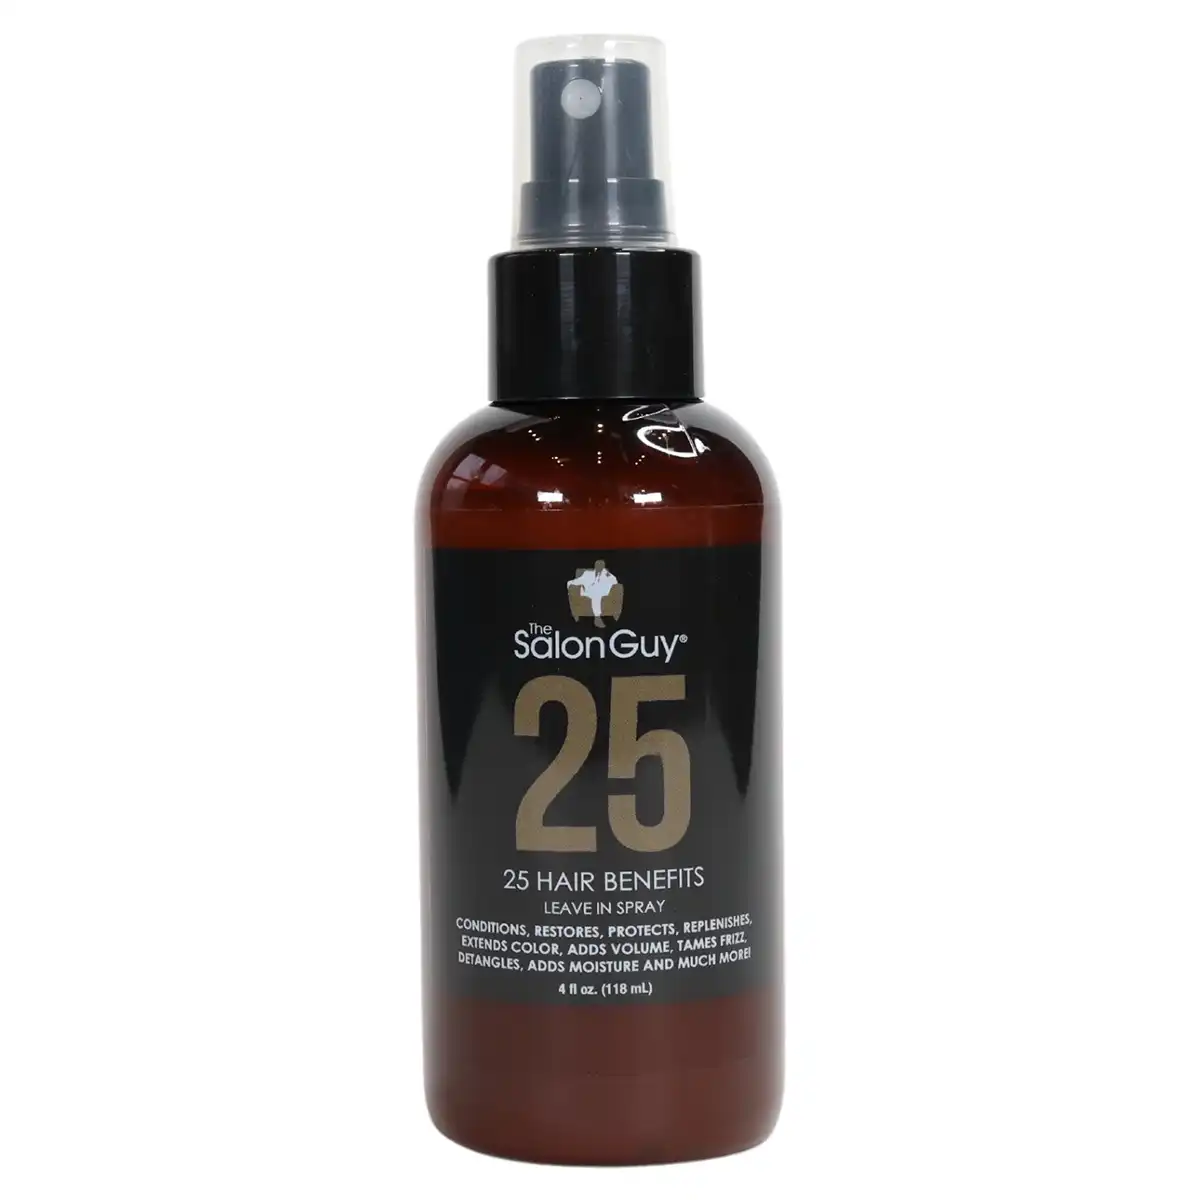 TheSalonGuy 25 Leave In Treatment Spray Hair Pre-Styler